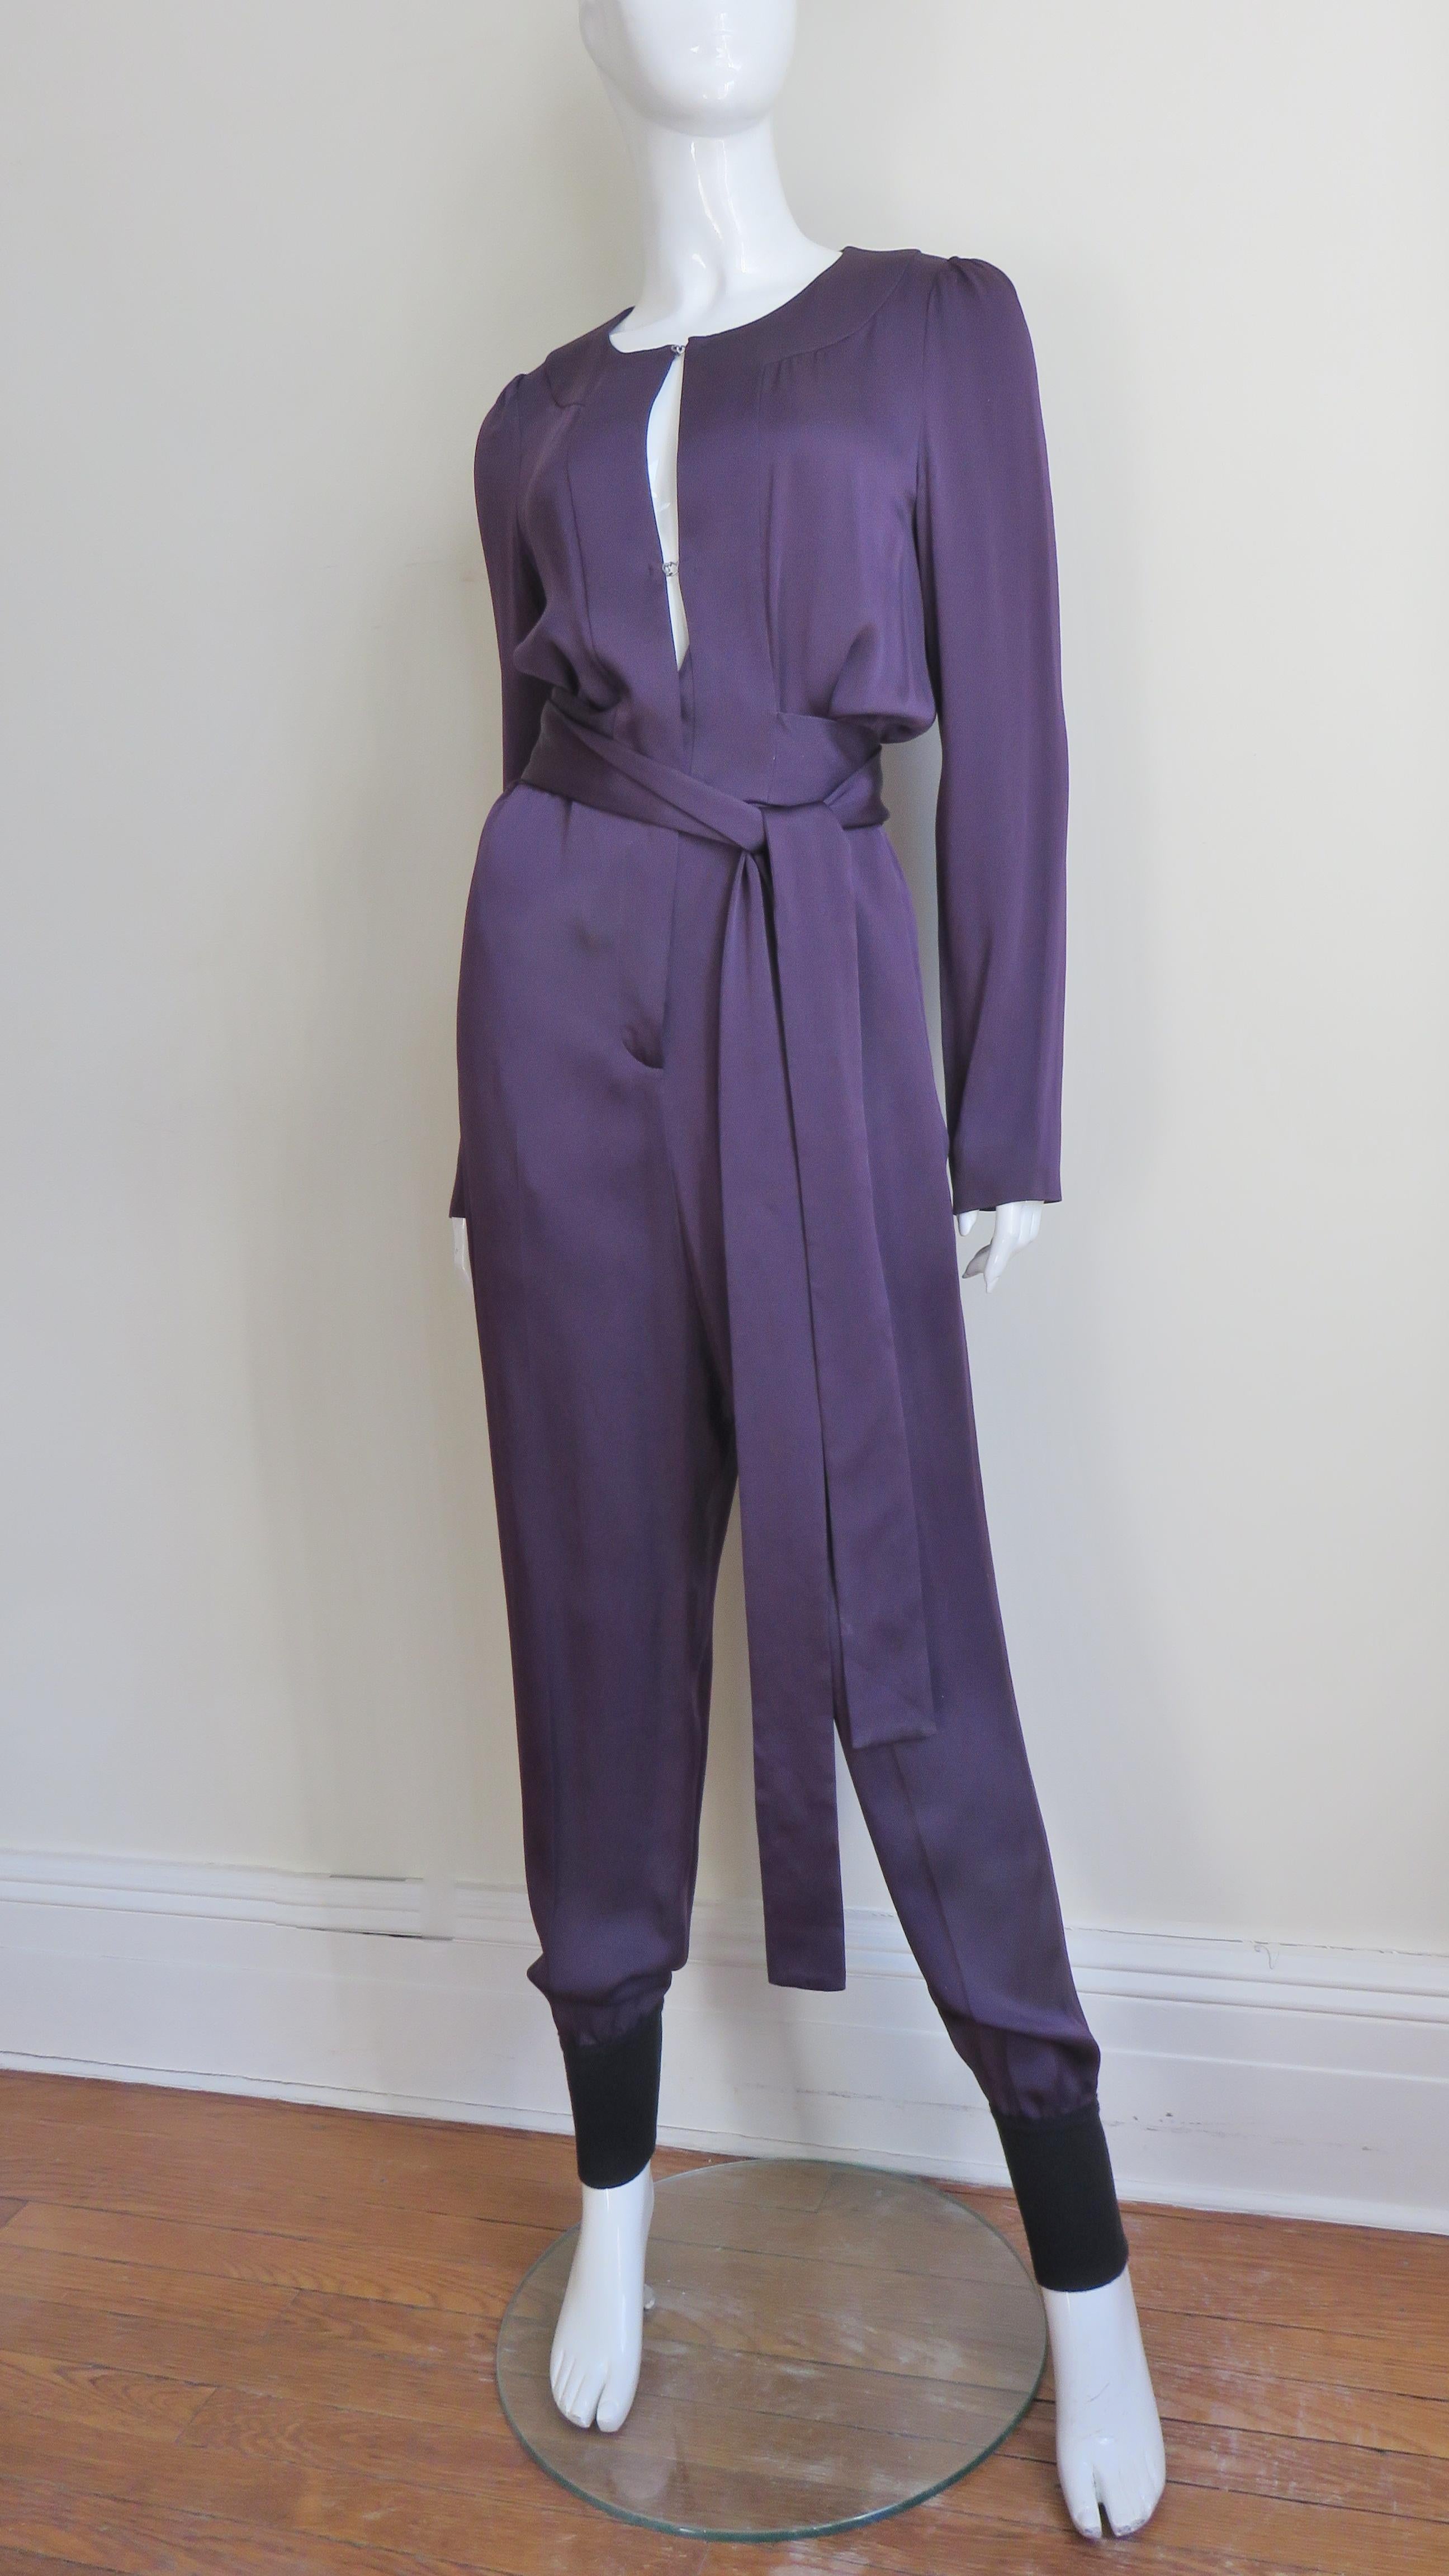 A fabulous eggplant purple silk jumpsuit from Sonia Rykiel. The jumpsuit has long sleeves, cuffed full pant legs, hip side seam pockets and a long belt wrapping around the waist.  It has a keyhole front closing with several silver hooks revealing a